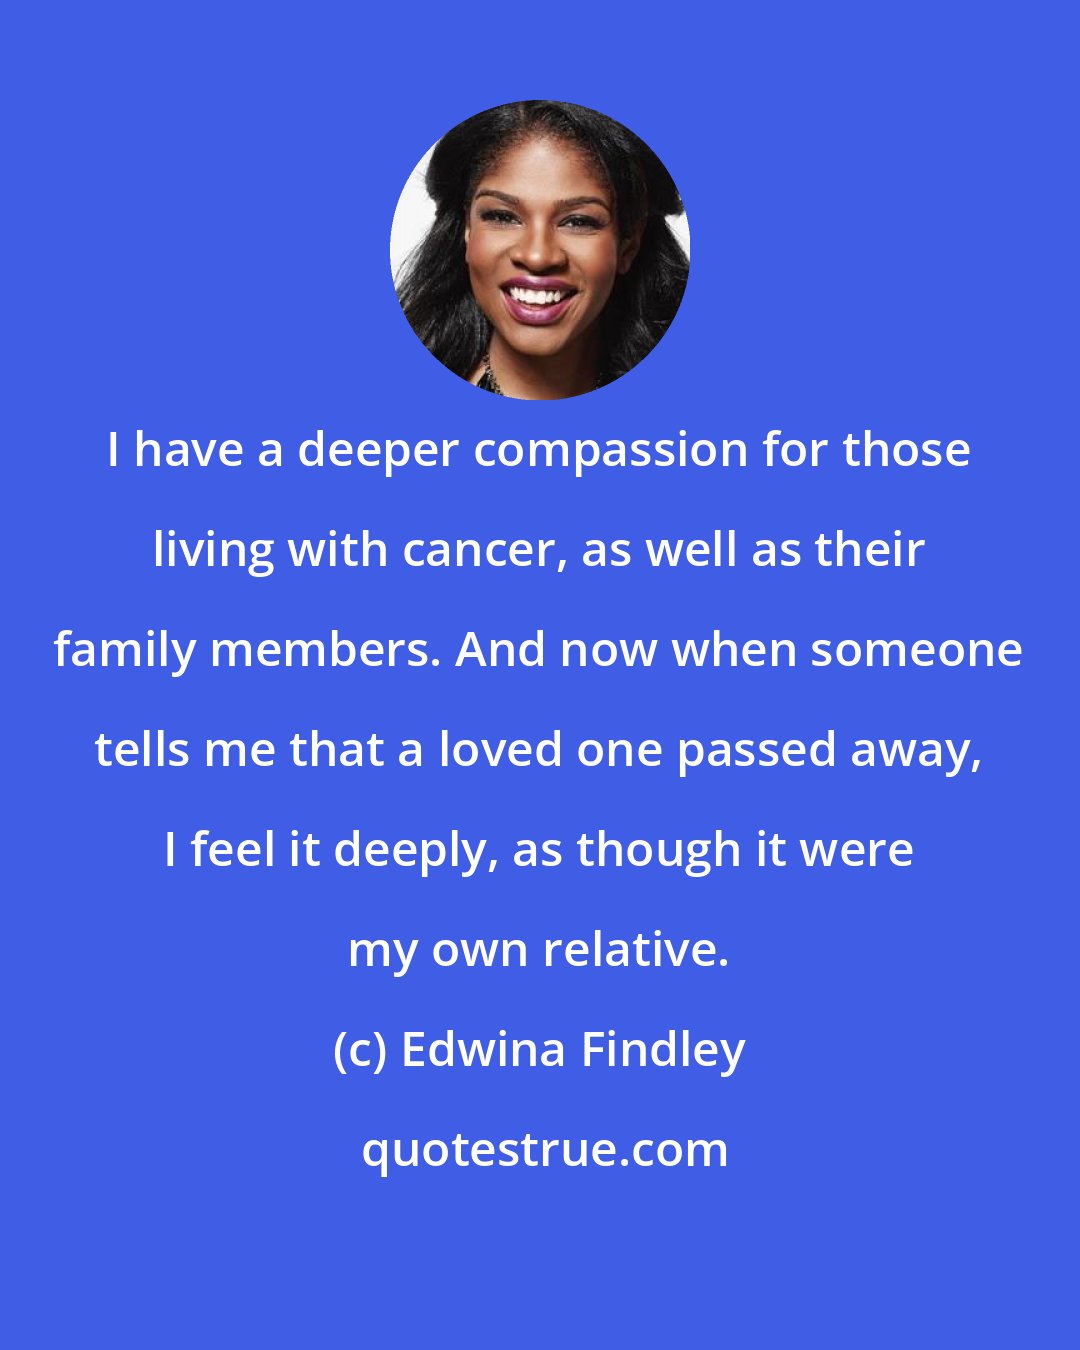 Edwina Findley: I have a deeper compassion for those living with cancer, as well as their family members. And now when someone tells me that a loved one passed away, I feel it deeply, as though it were my own relative.